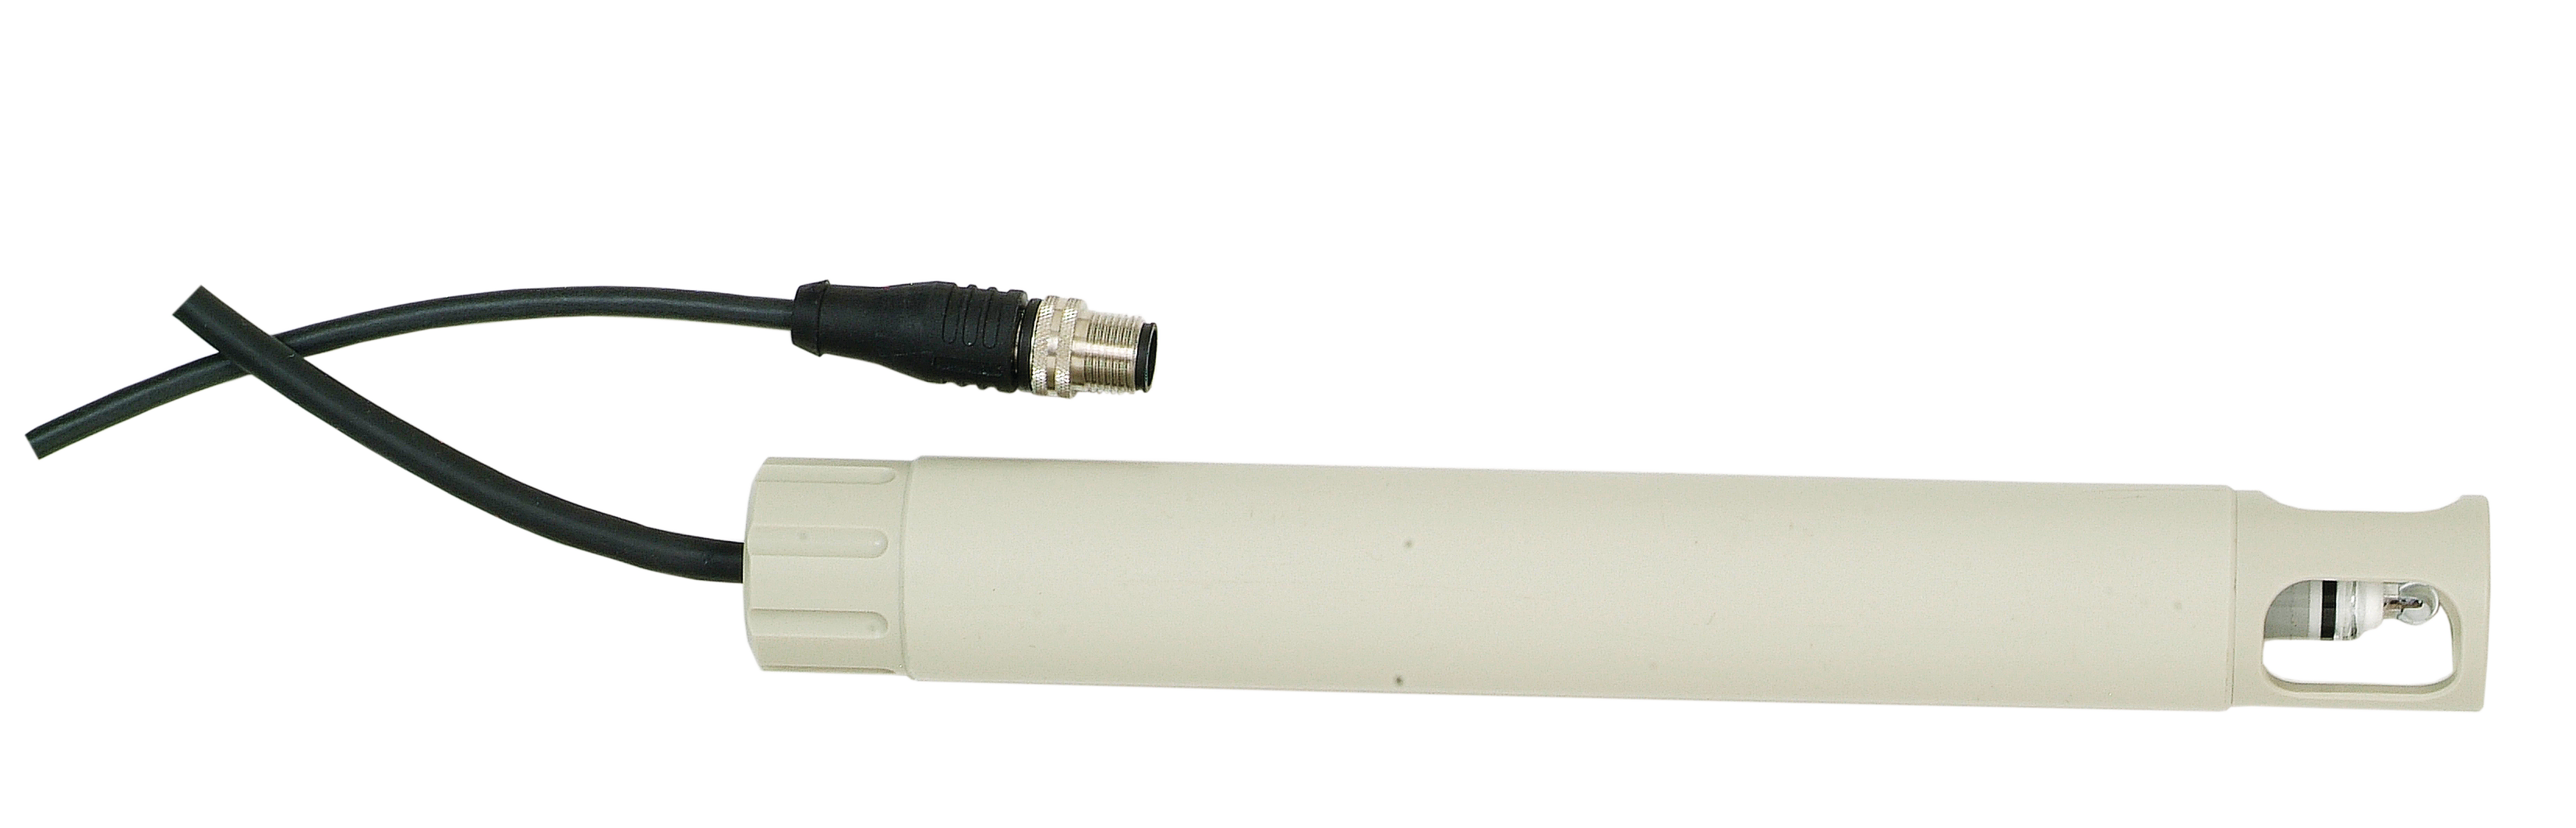 ARD170 Submersible Fitting with sinker | PP-H or PP-electrically conductive | For field measurement with Memosens sensors